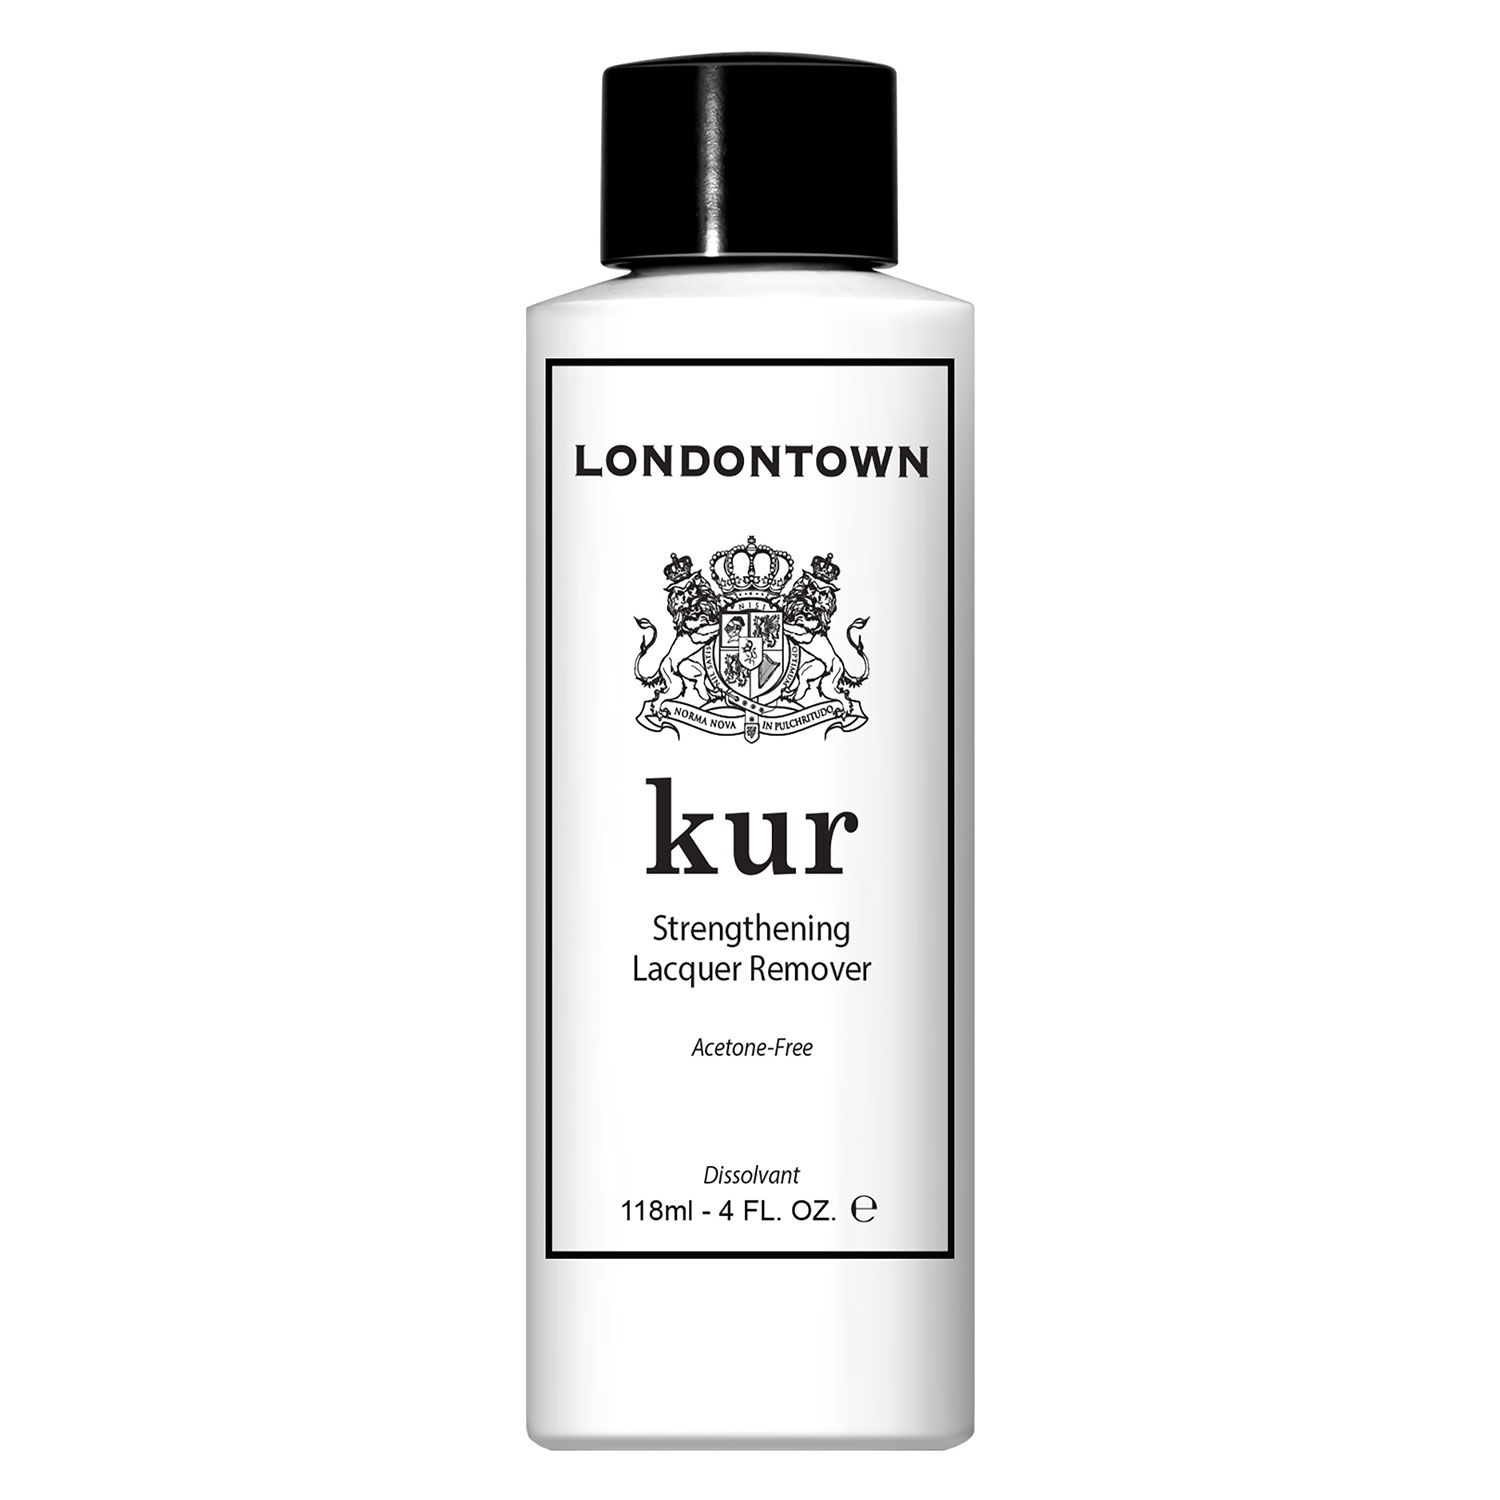 Product image from kur - Lacquer Remover